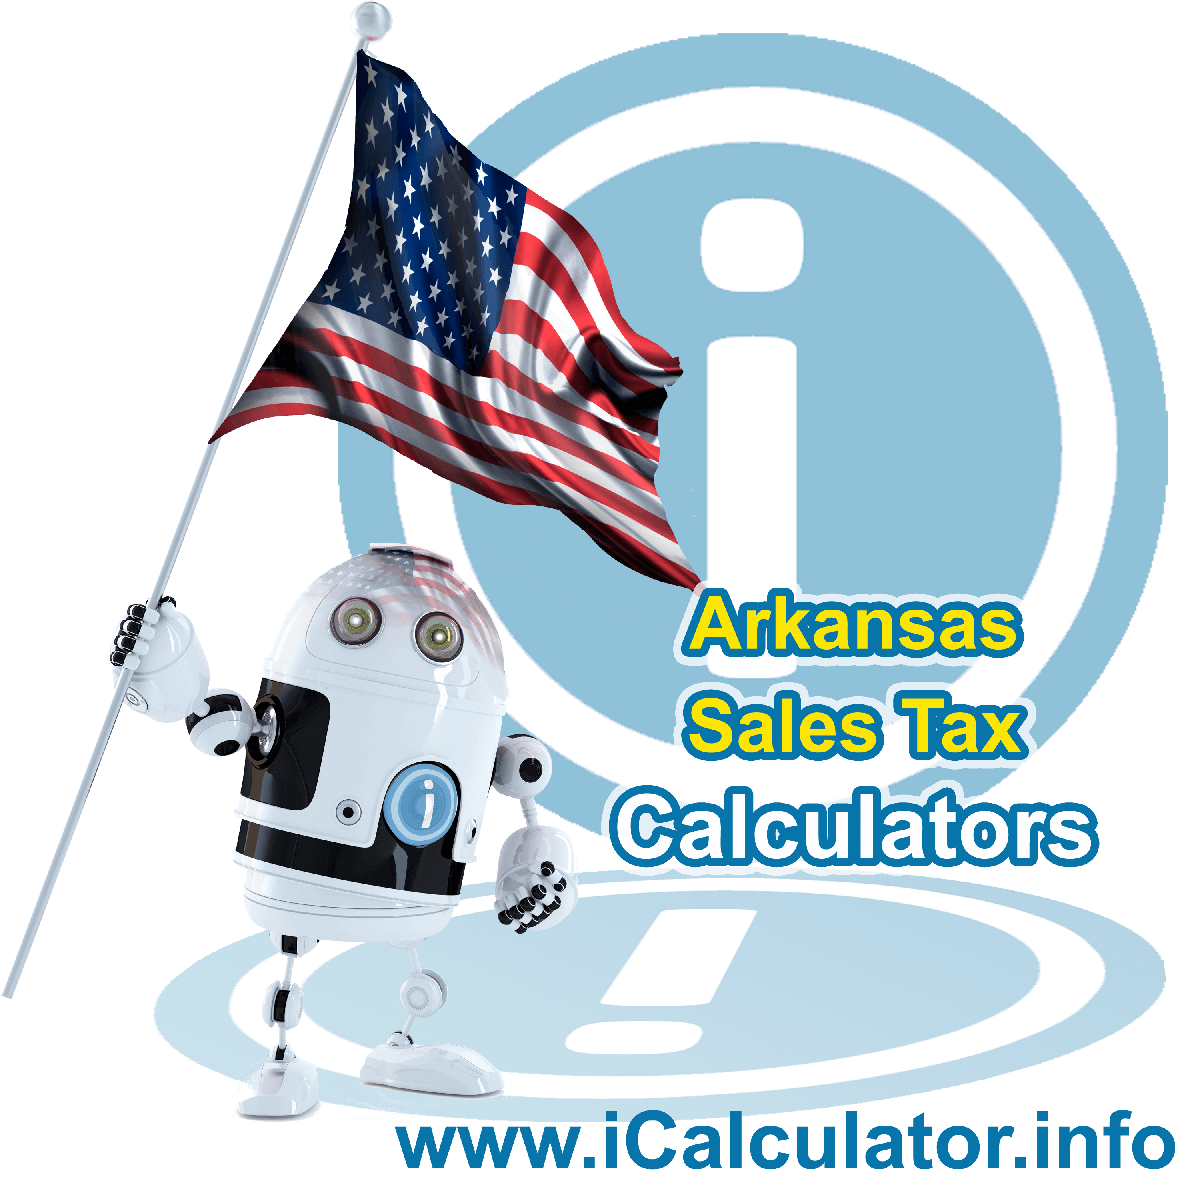 Stone County Sales Rates: This image illustrates a calculator robot calculating Stone County sales tax manually using the Stone County Sales Tax Formula. You can use this information to calculate Stone County Sales Tax manually or use the Stone County Sales Tax Calculator to calculate sales tax online.